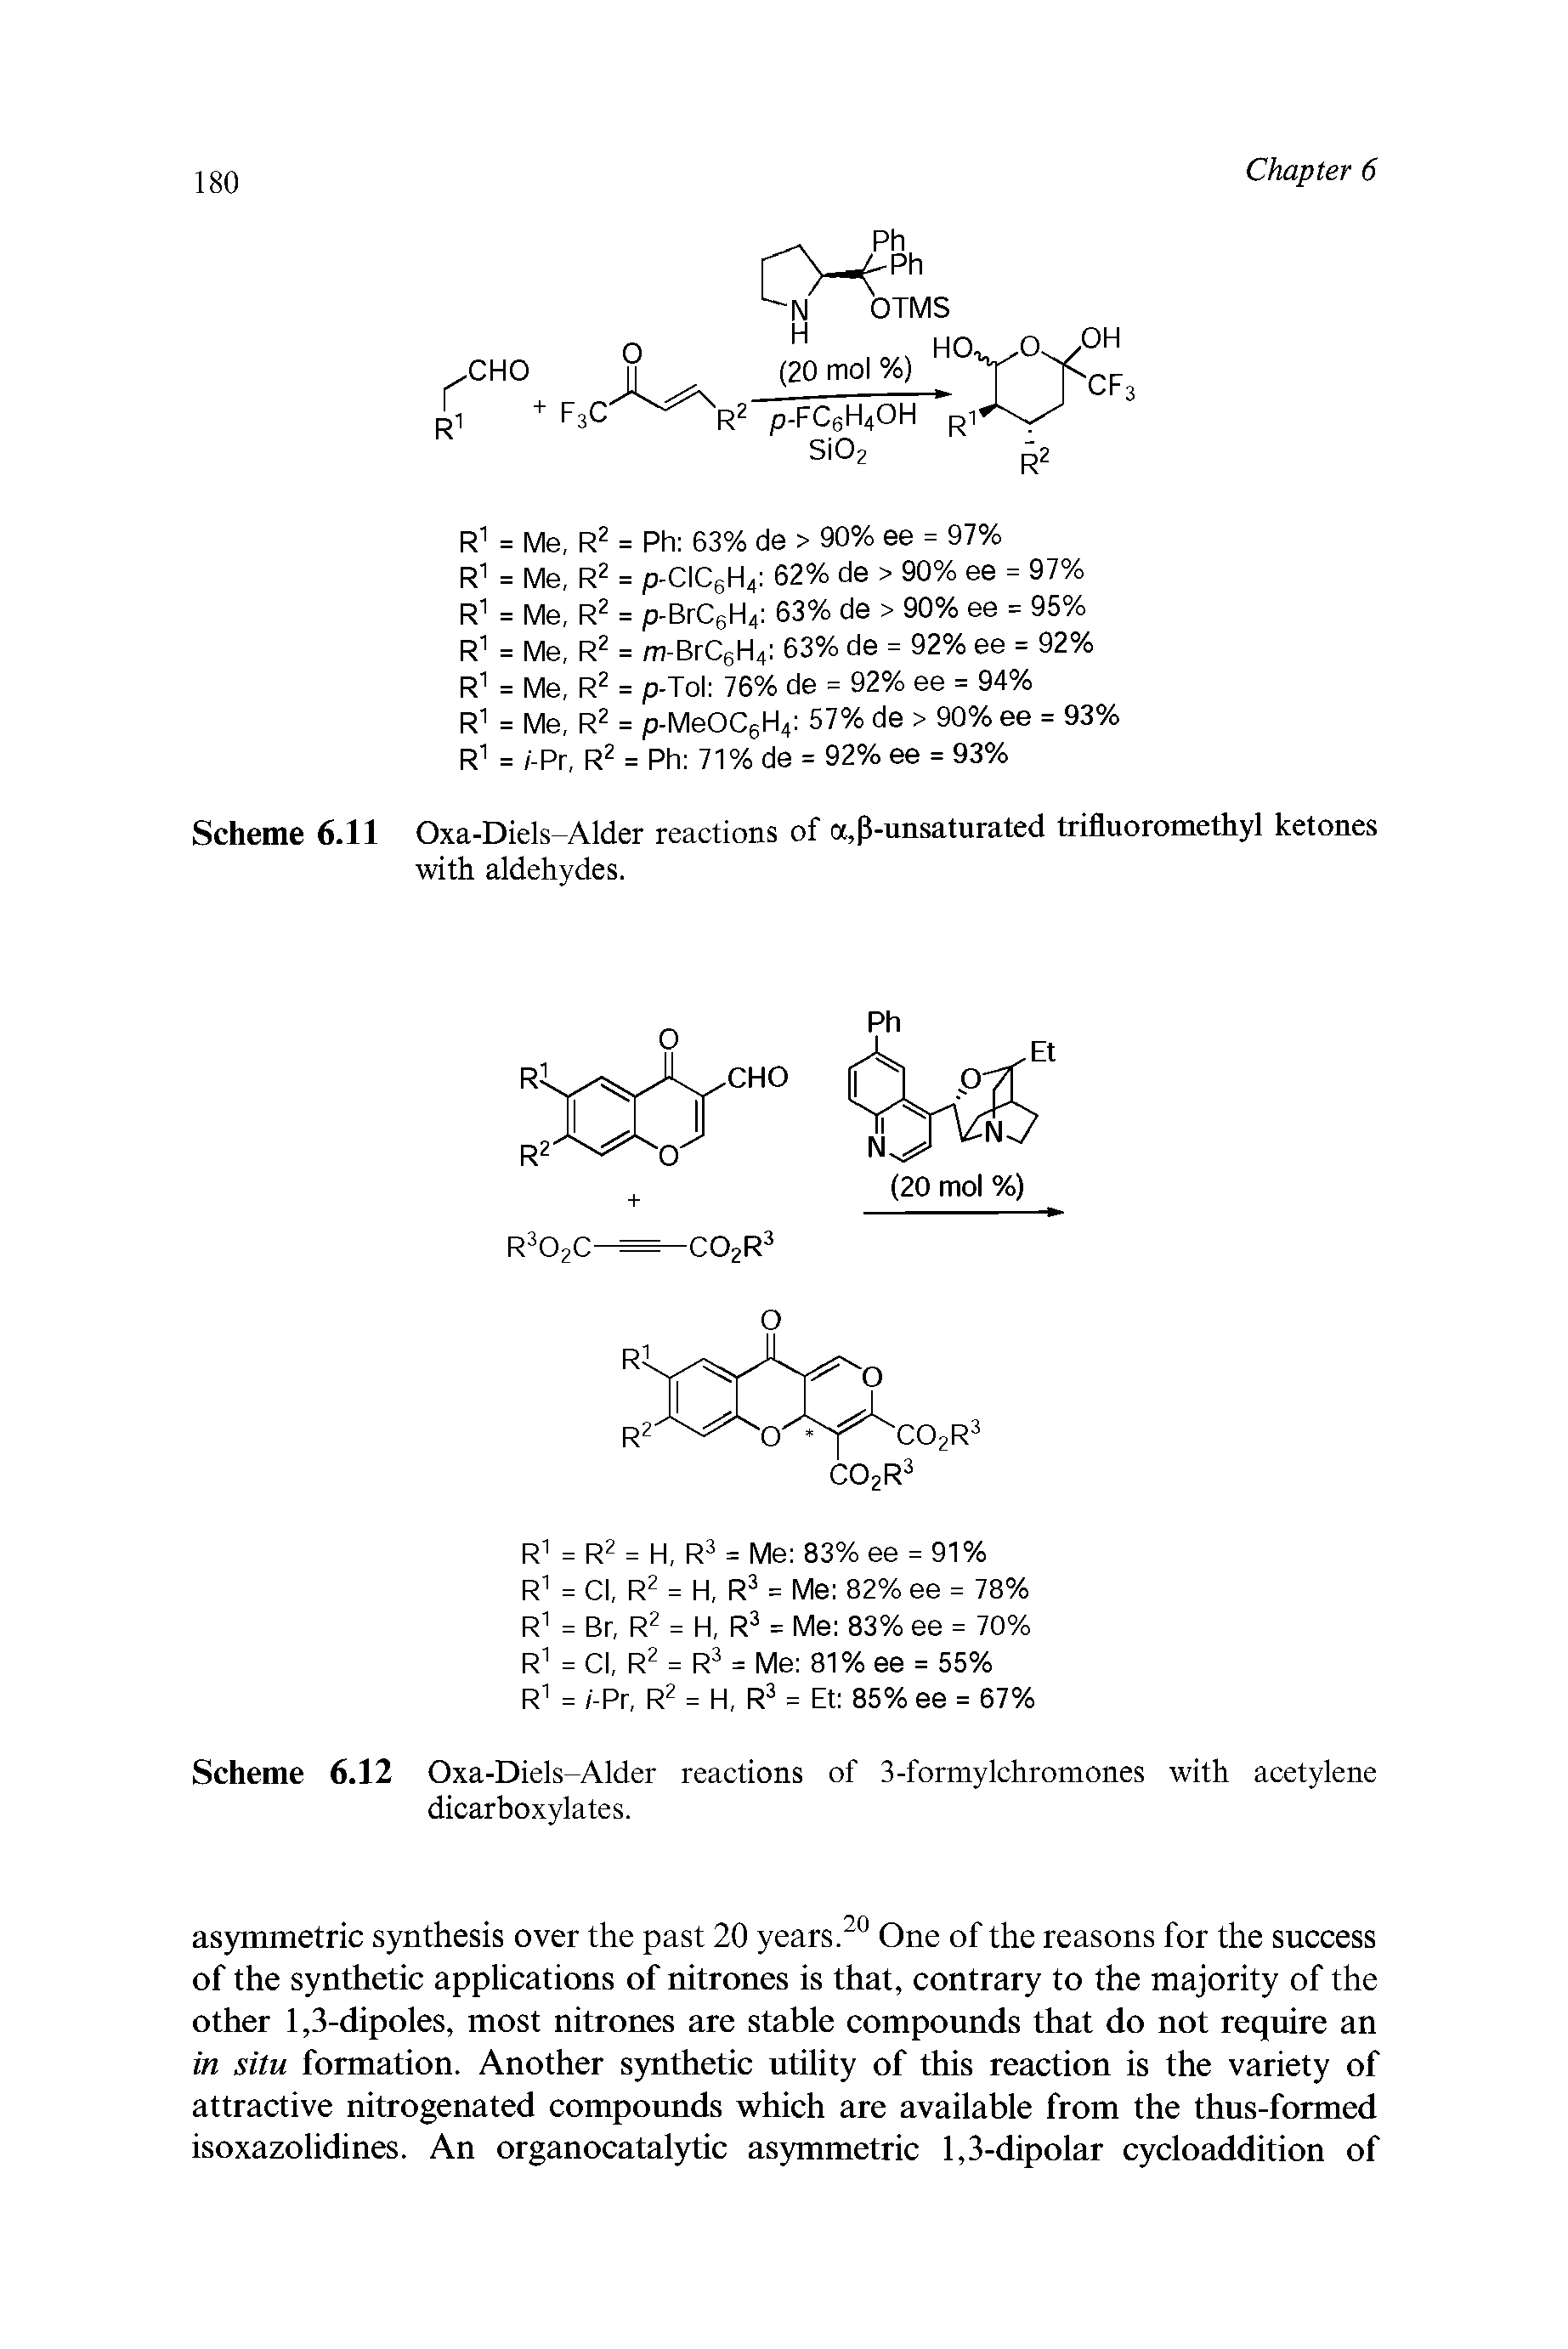 Scheme 6.12 Oxa-Diels-Alder reactions of 3-formylchromones with acetylene dicarboxylates.